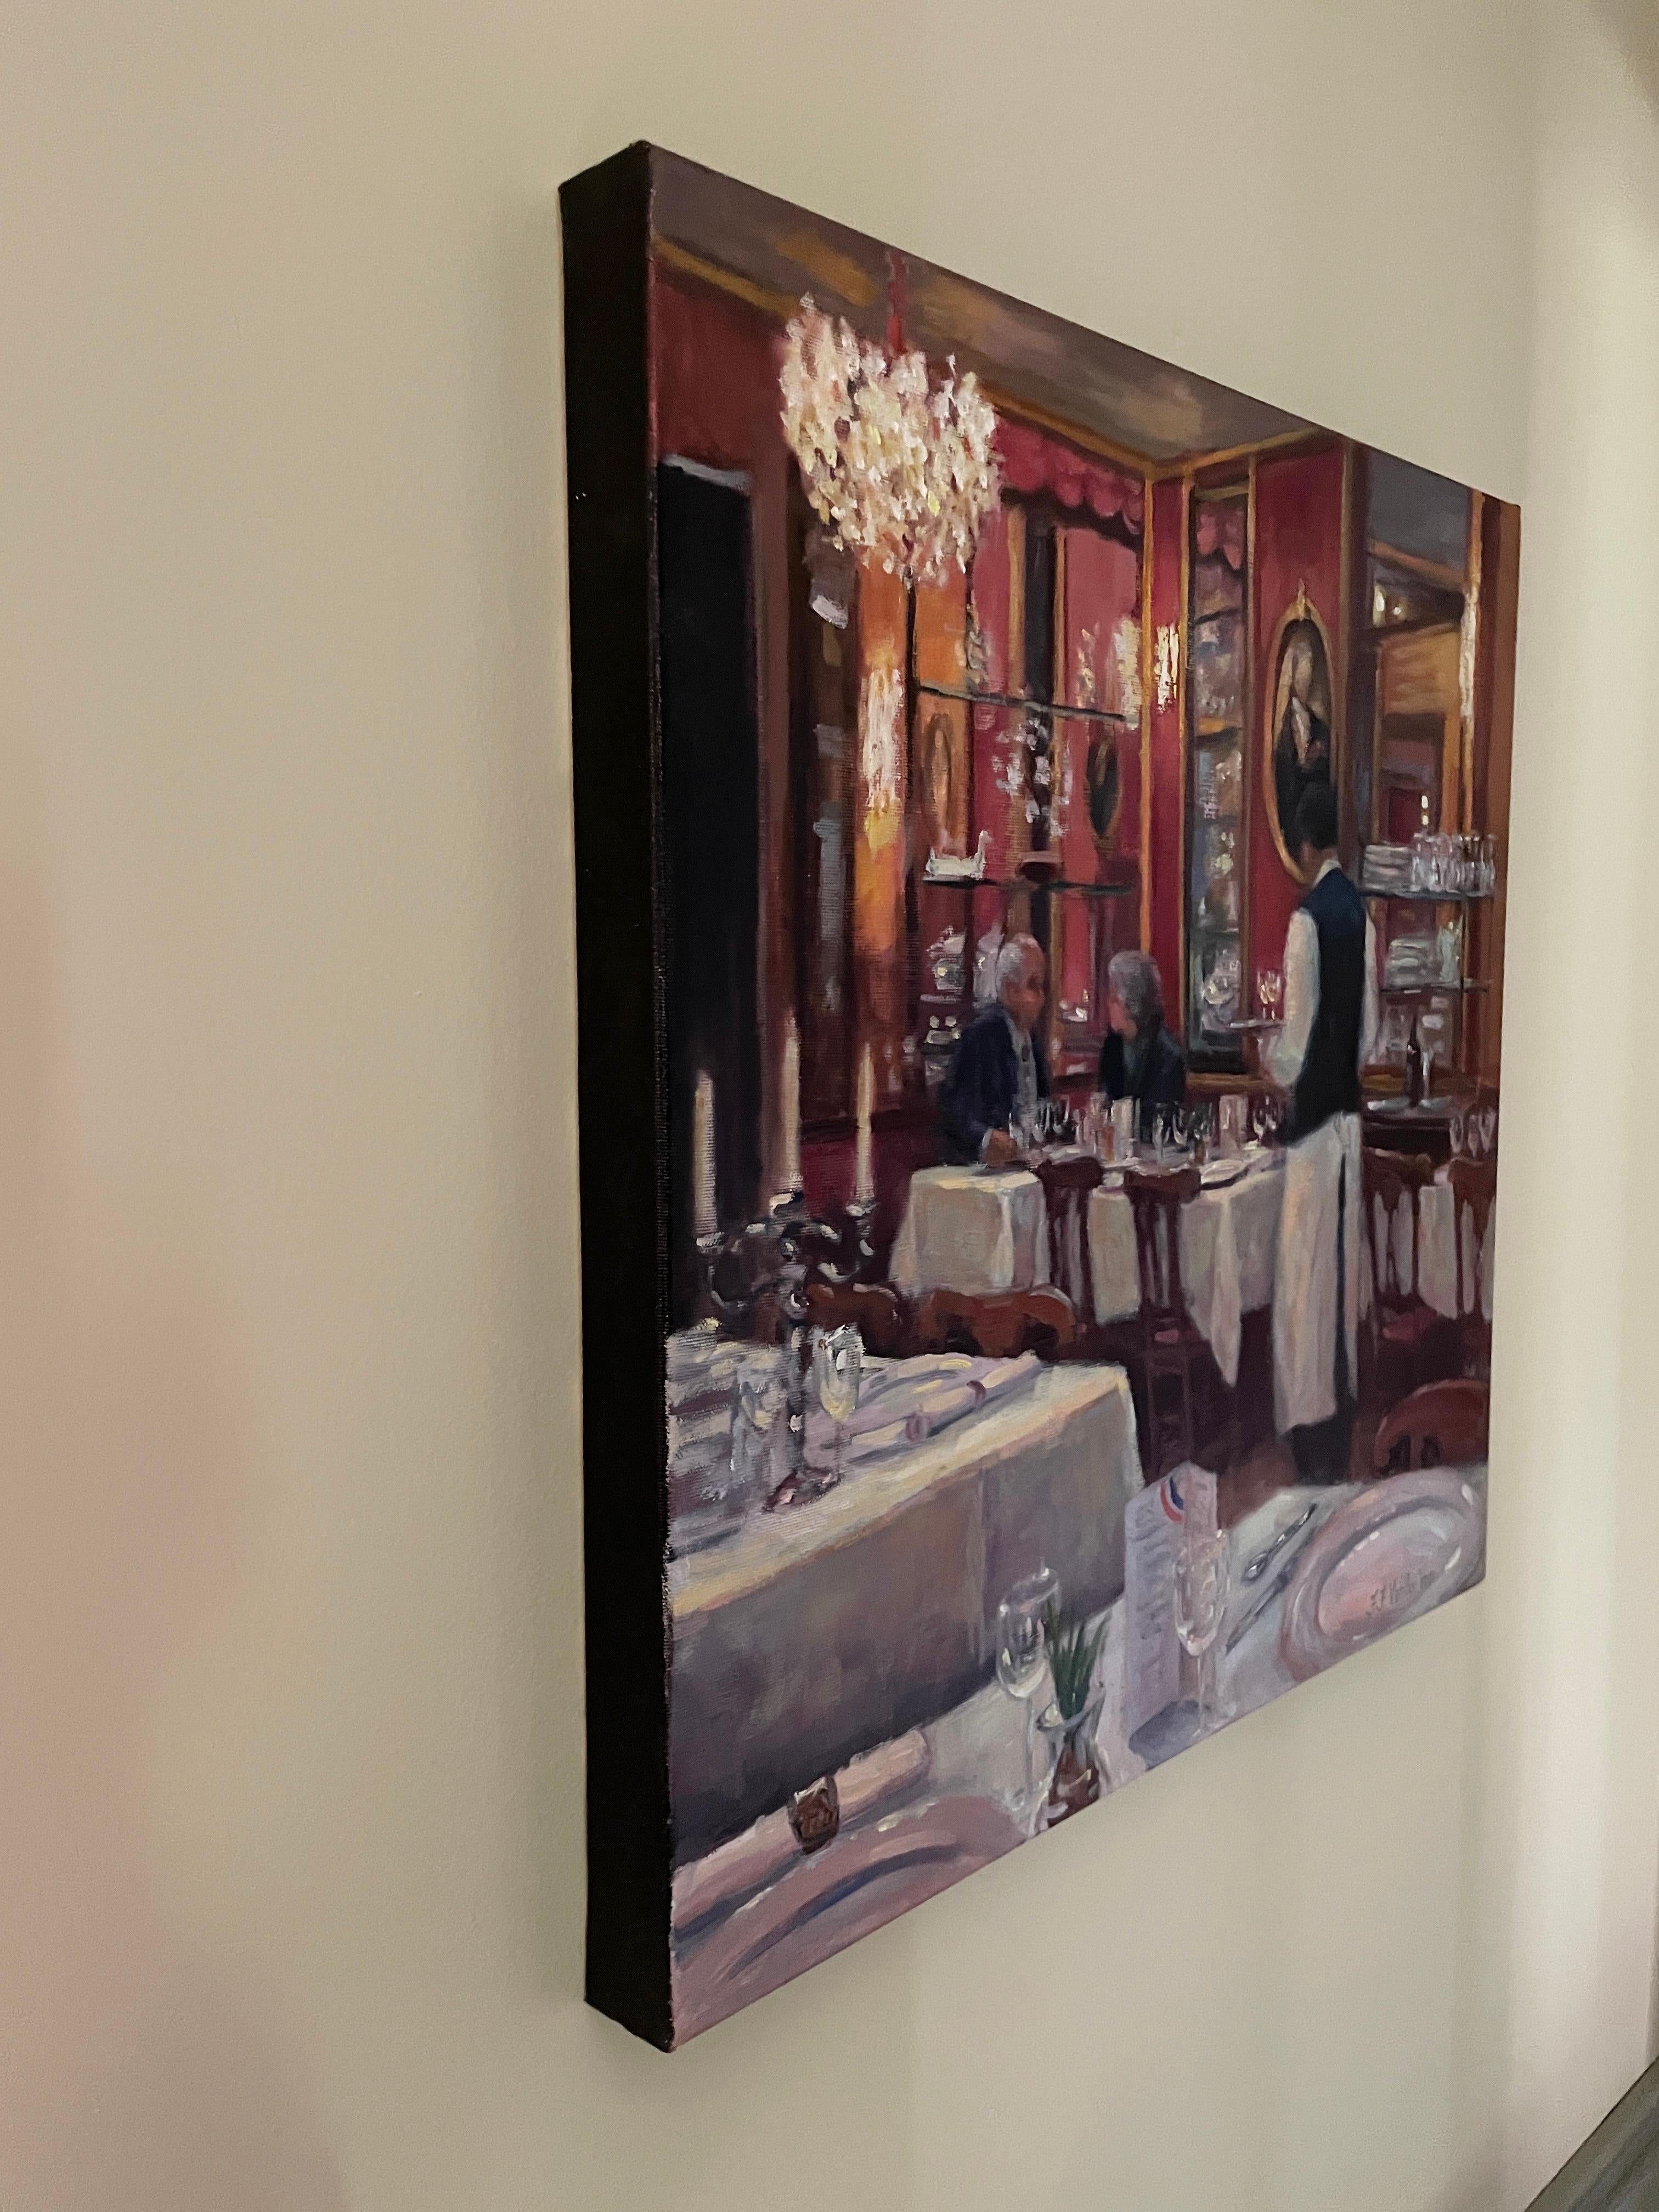 <p>Artist Comments<br>Artist Faye Vander Veer paints an intimate view depicting the interior of Le Procopeâ€”one of Paris's most famous restaurants. Using a limited palette and decisive brushwork, Faye creates an ambient environment that draws the